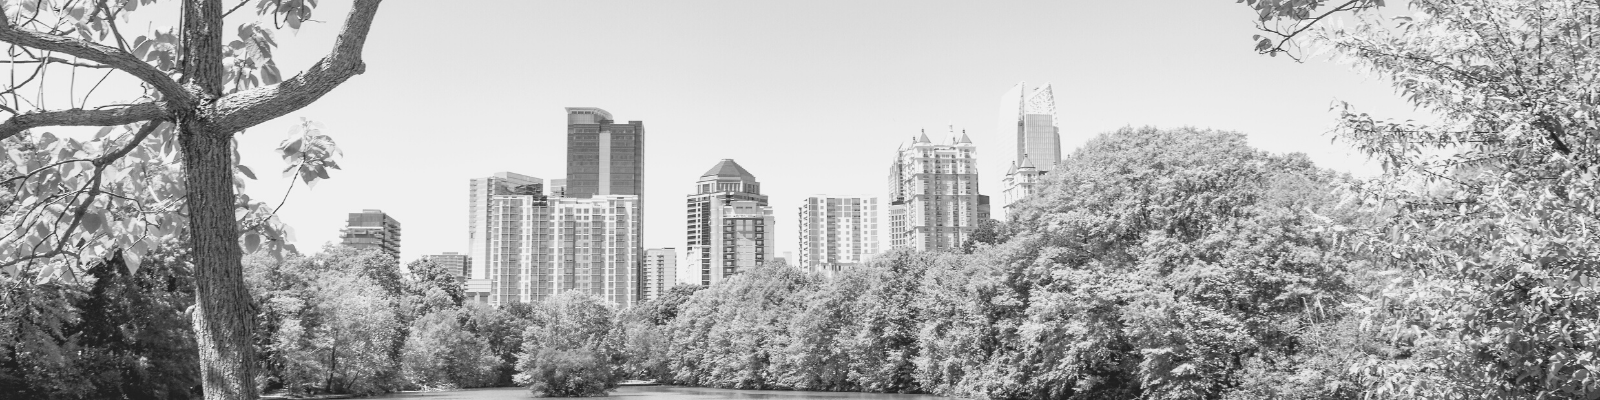 Contact us at our Midtown Atlanta office - skyline pictured here